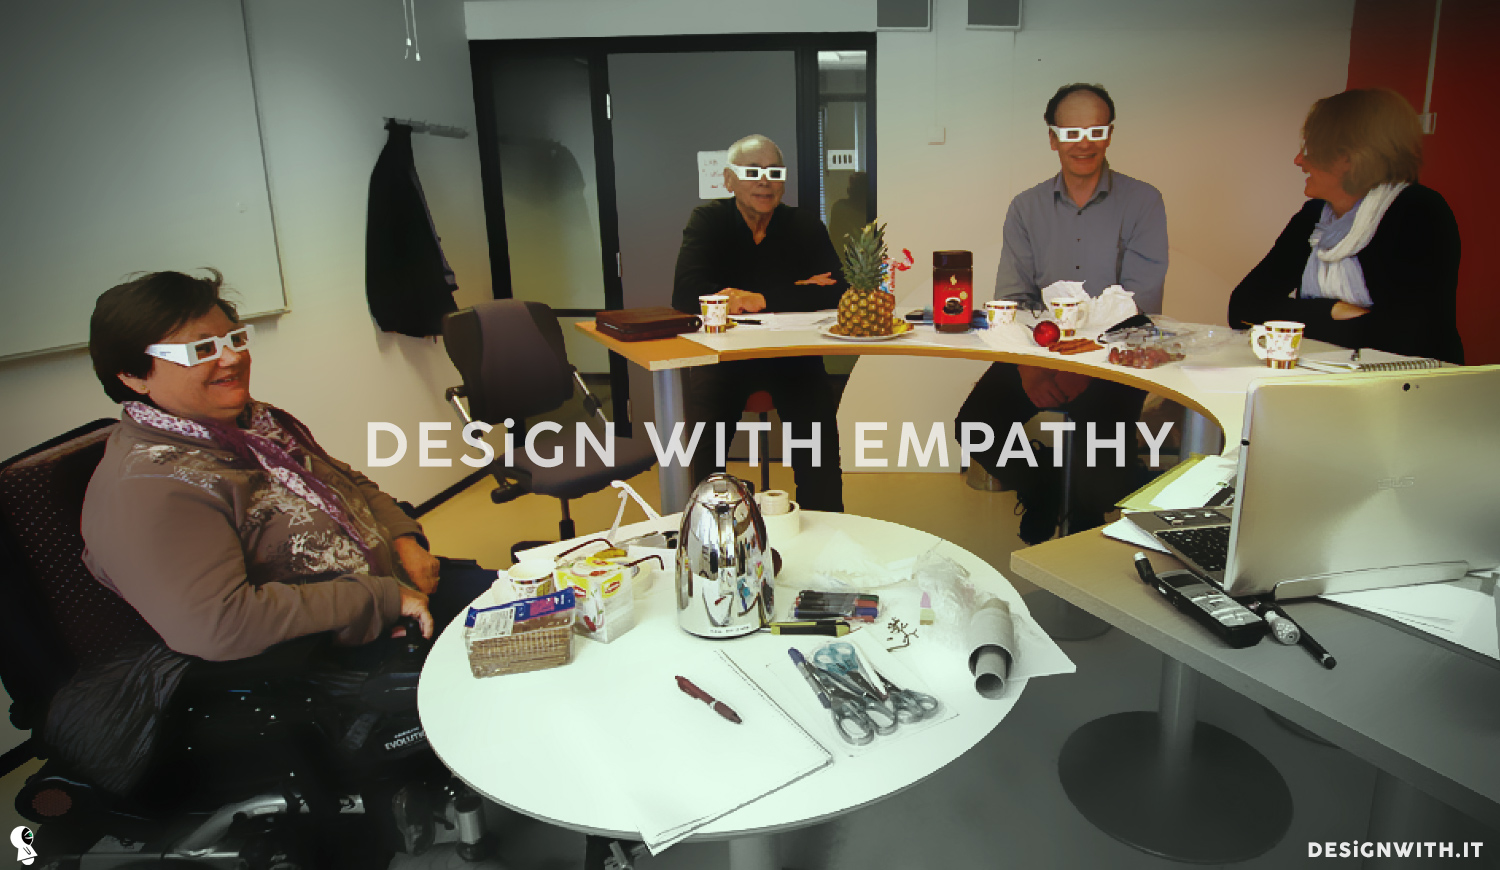 Design with empathy. Design with it!